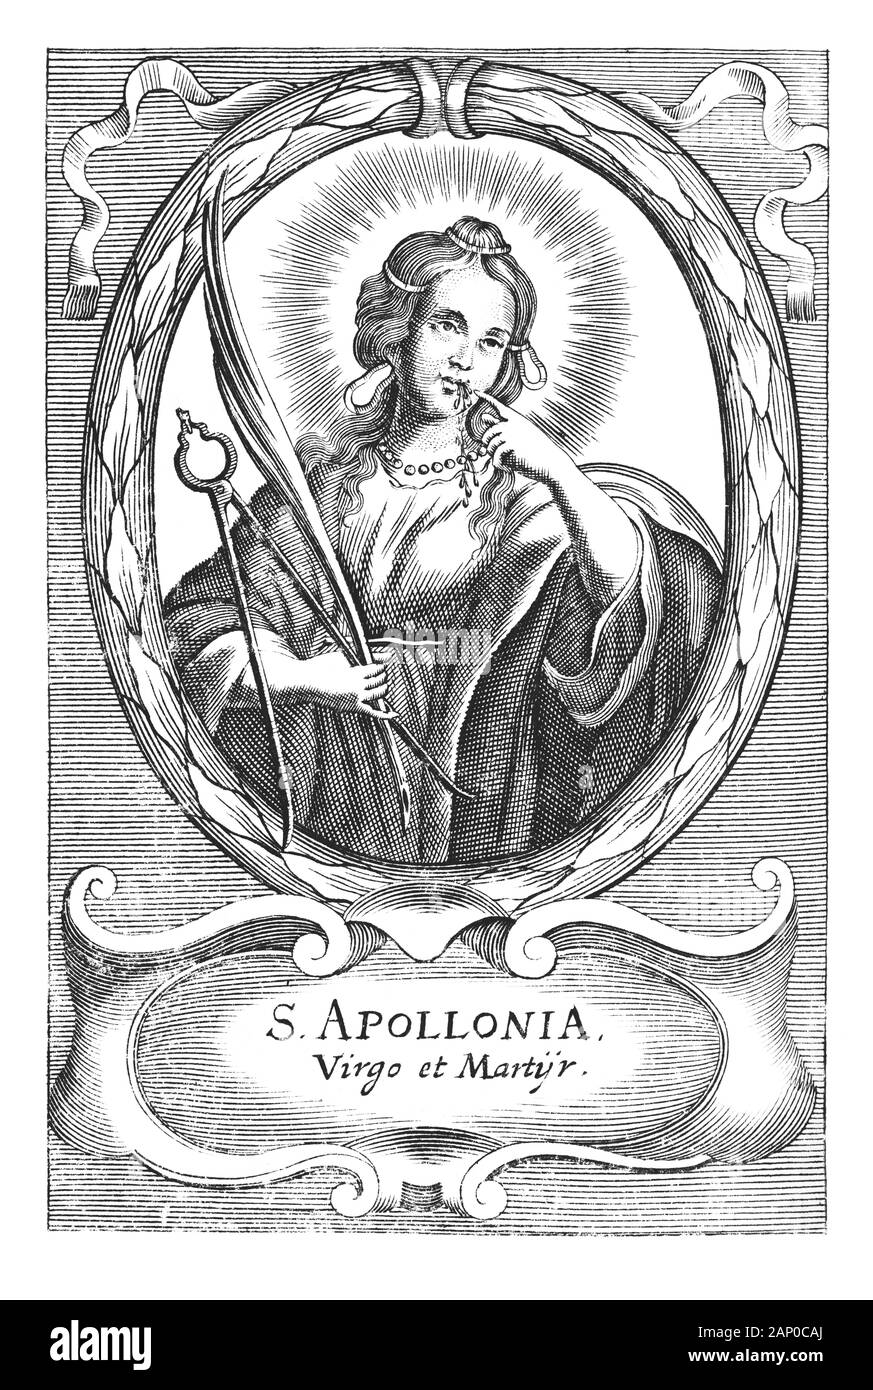 Antique vintage religious allegorical engraving or drawing of Christian holy woman saint Apollonia holding pliers and tooth.Illustration from Book Die Betrubte Und noch Ihrem Beliebten..., Austrian Empire,1716. Artist is unknown. Stock Photo